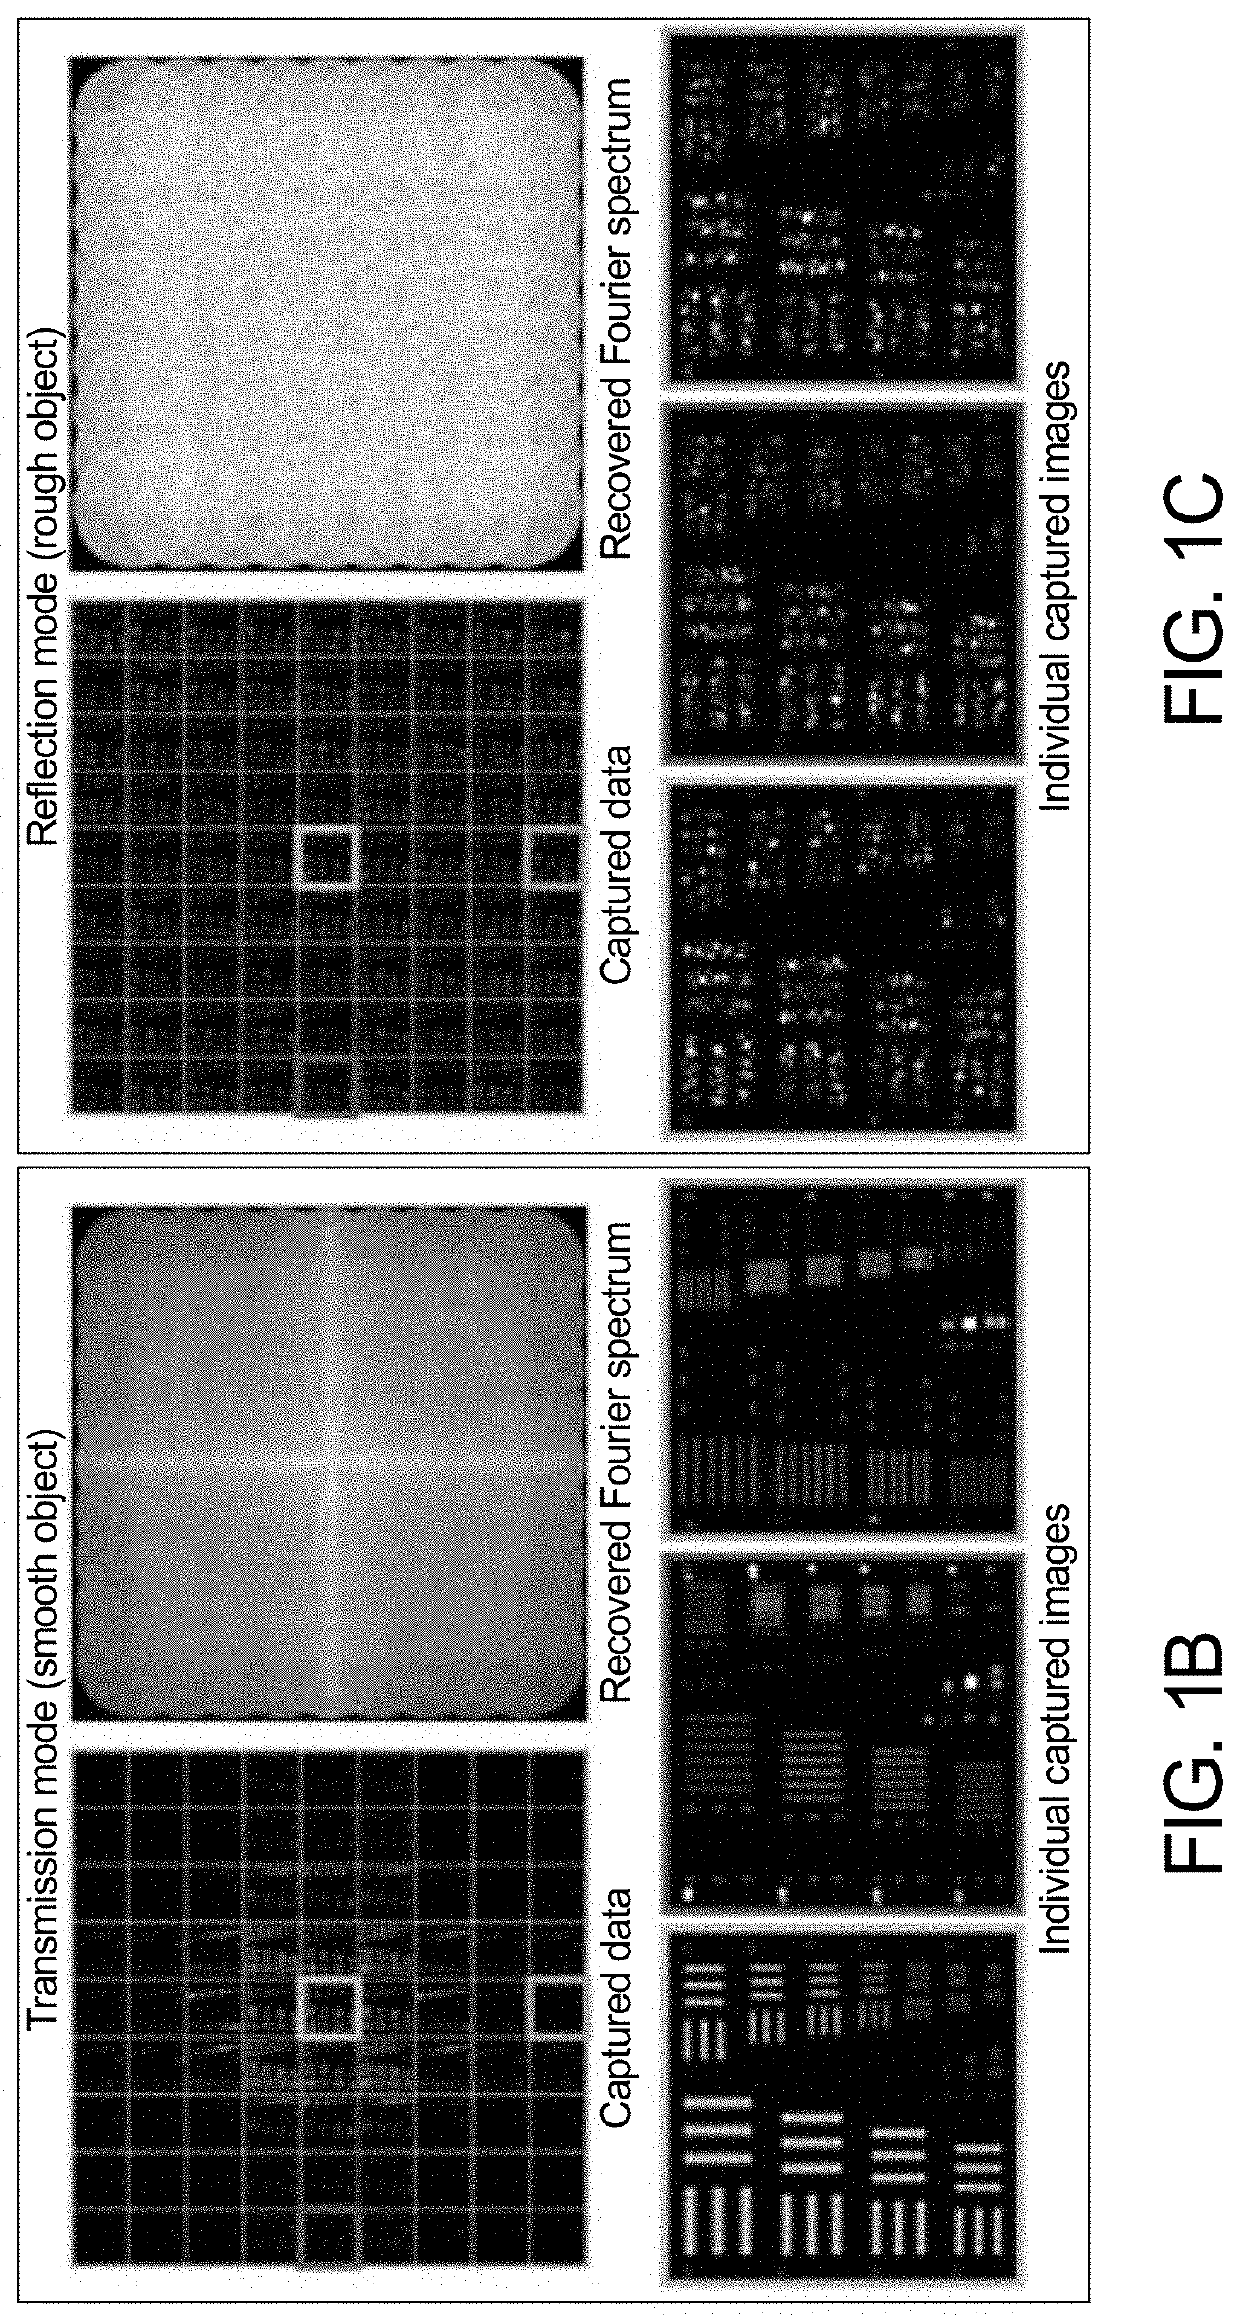 Synthetic Apertures for Long-Range, Sub-Diffraction Limited Visible Imaging Using Fourier Ptychography